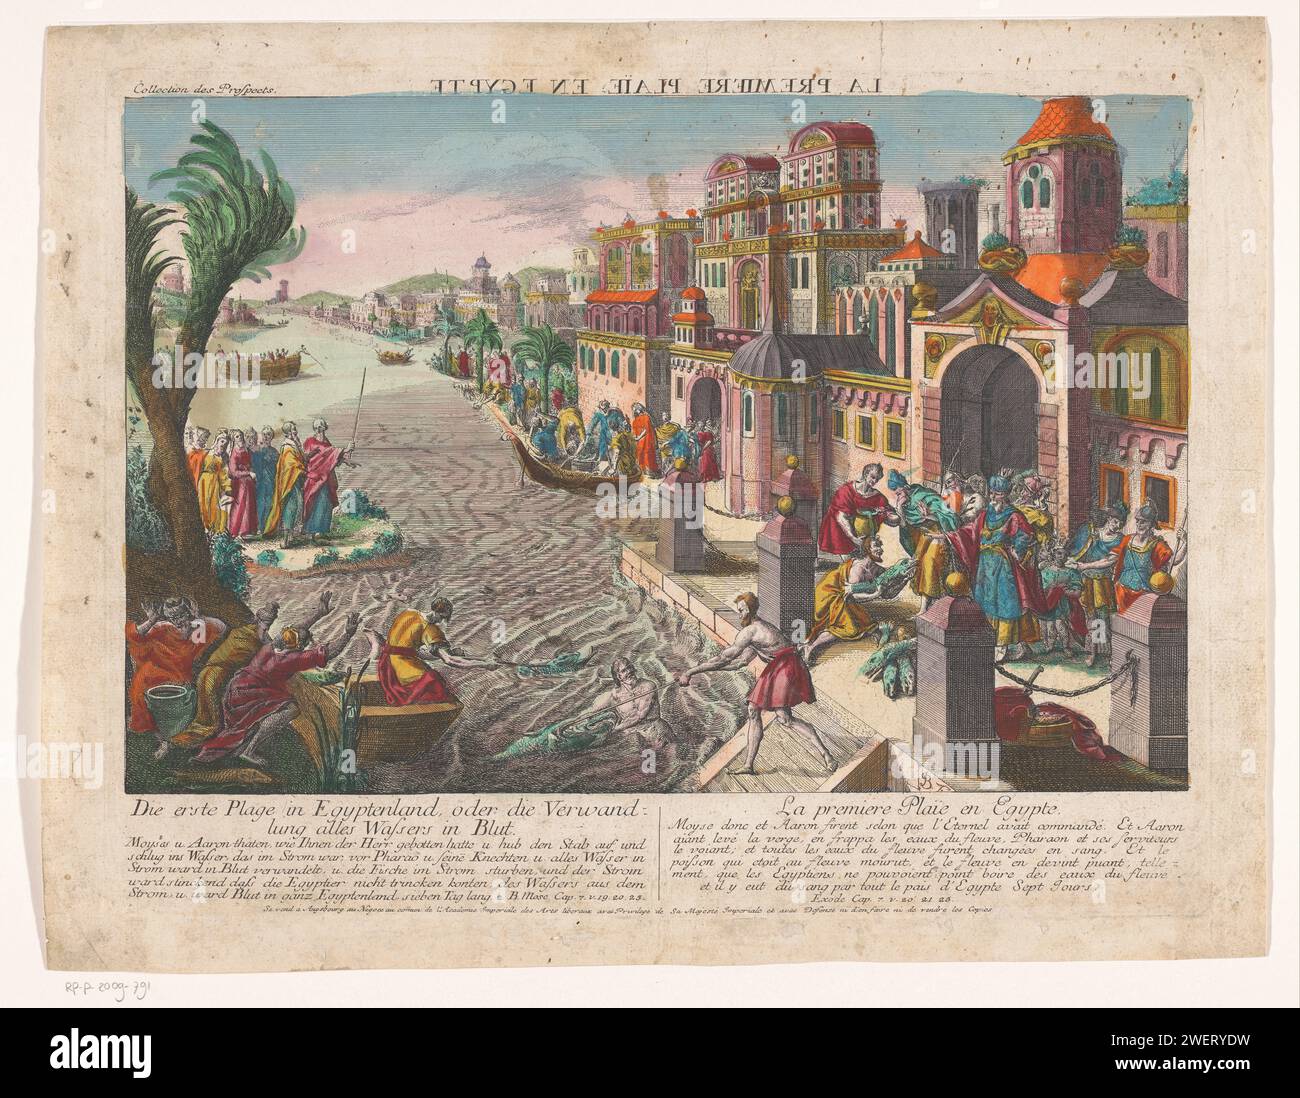 The first plague of Egypt, 1755 - 1779 print The scourge of the water turned into blood. View of a city on a river. On the shore on the left Moses that hits the water with his stick. On the right on the quay de Pharaoh with his entourage. The water is colored red and dead fish are removed. Under print explanation in German and French.  paper. watercolor (paint) etching / brush the plague of water turned into blood: as Pharaoh goes down to the Nile, Aaron strikes the surface of the river with his rod; the water turns into blood and all the fishes die Stock Photo